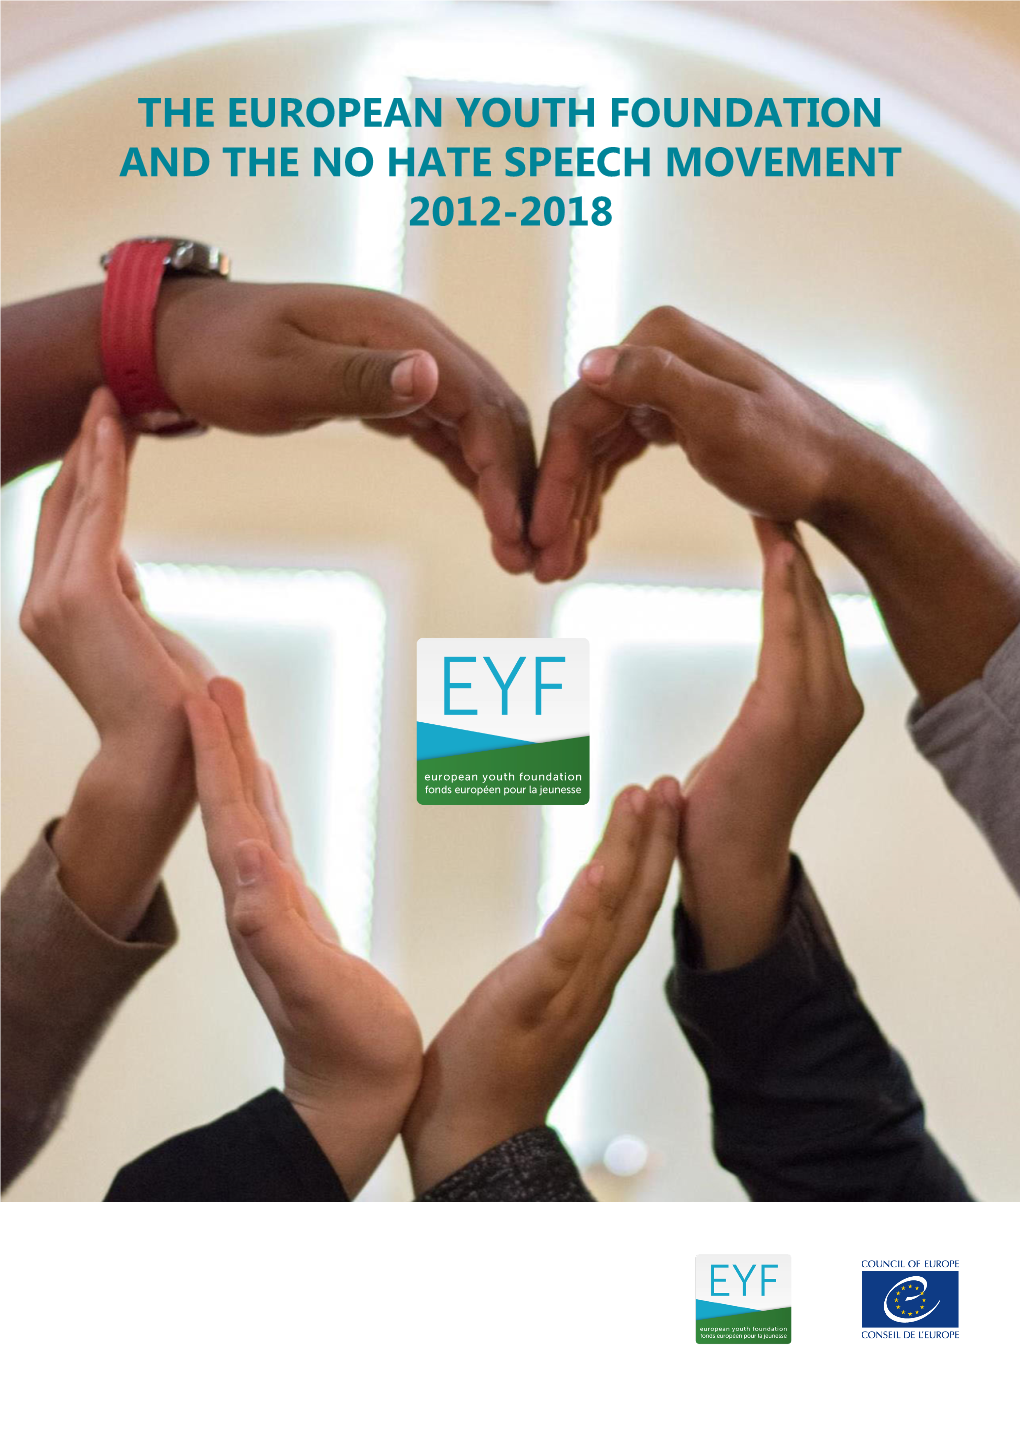 THE EUROPEAN YOUTH FOUNDATION and the NO HATE SPEECH MOVEMENT 2012-2018 Foreword